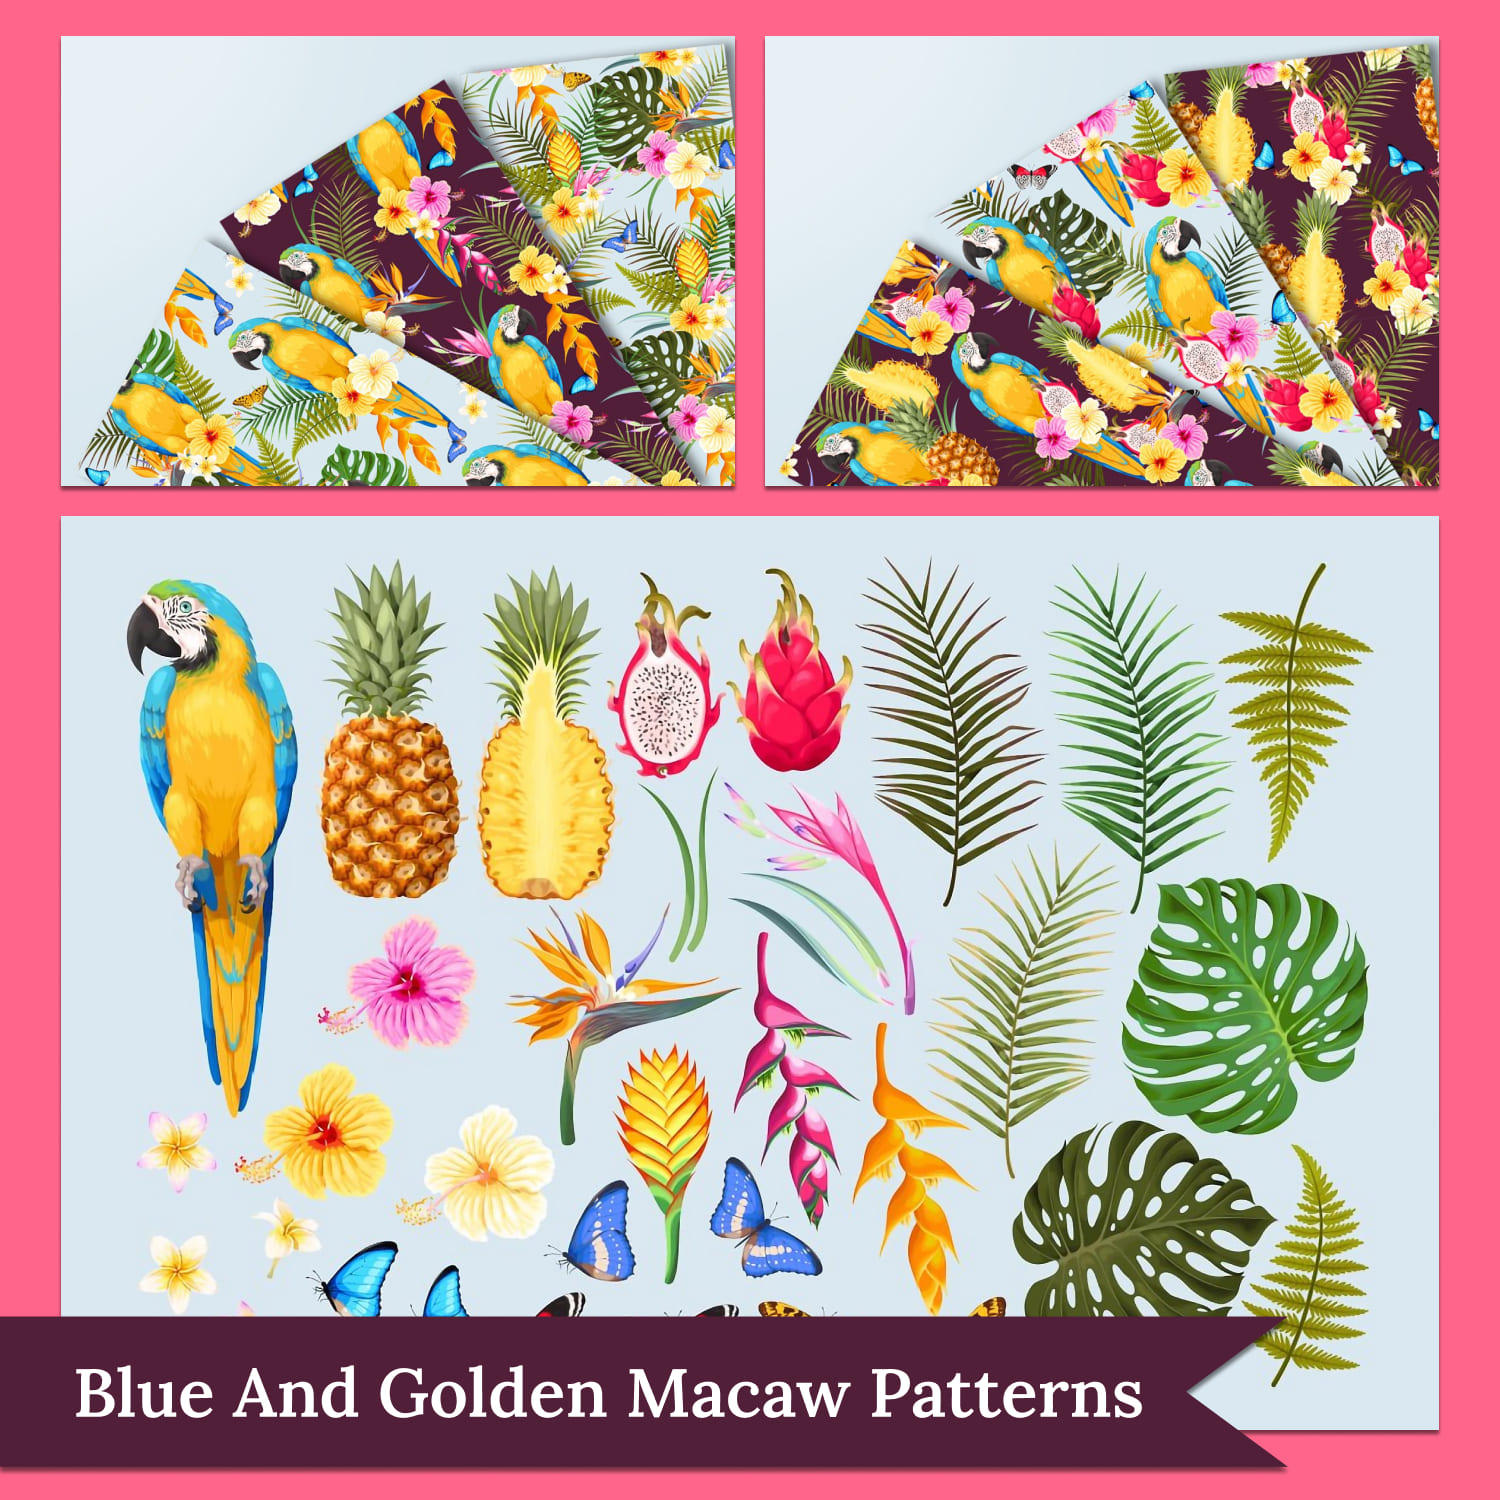 Blue-and-Golden Macaw Patterns - main image preview.